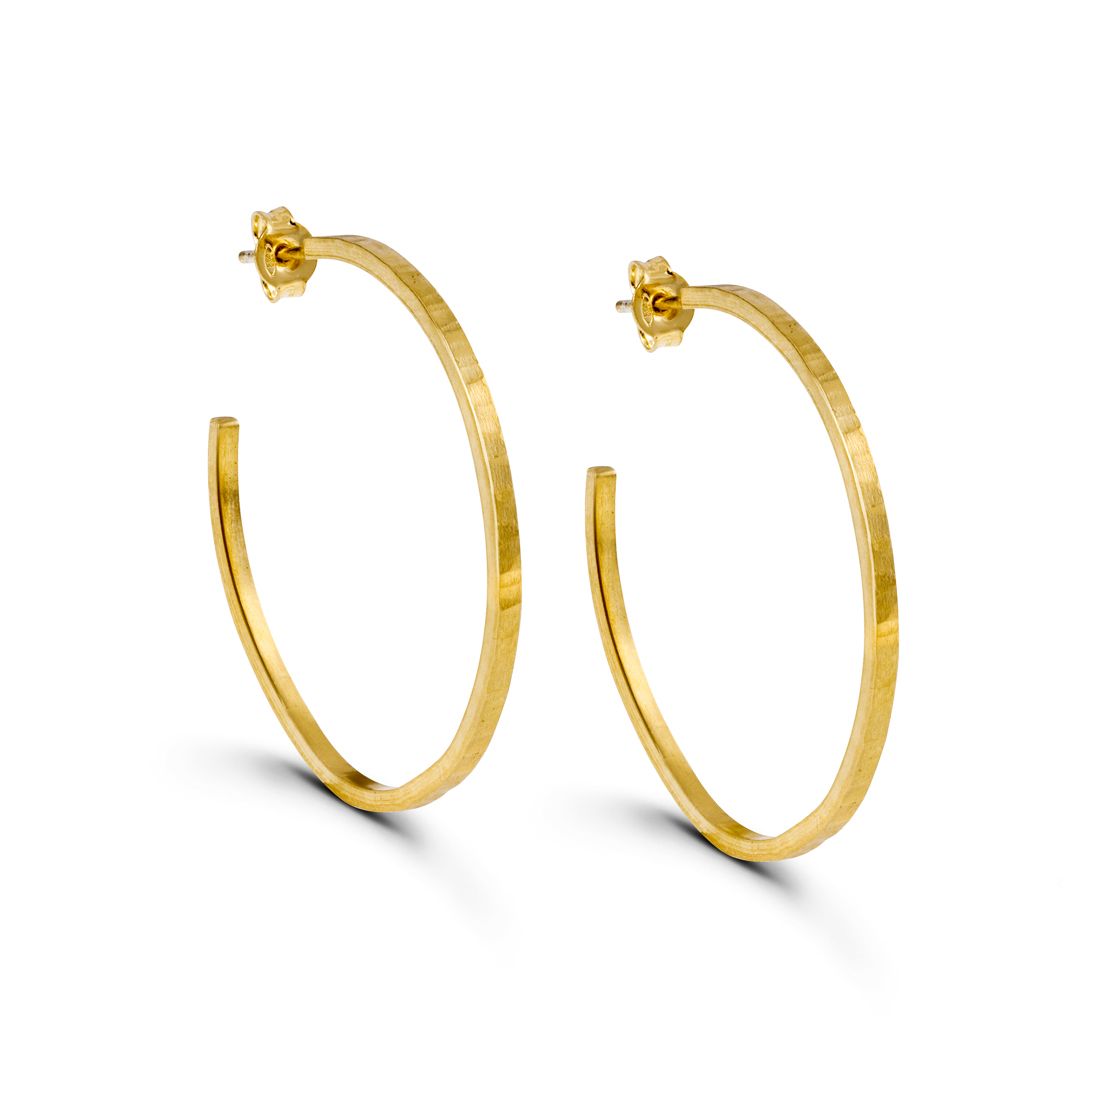 Gold hoop earrings with square edges offer a modern twist to a classic style.